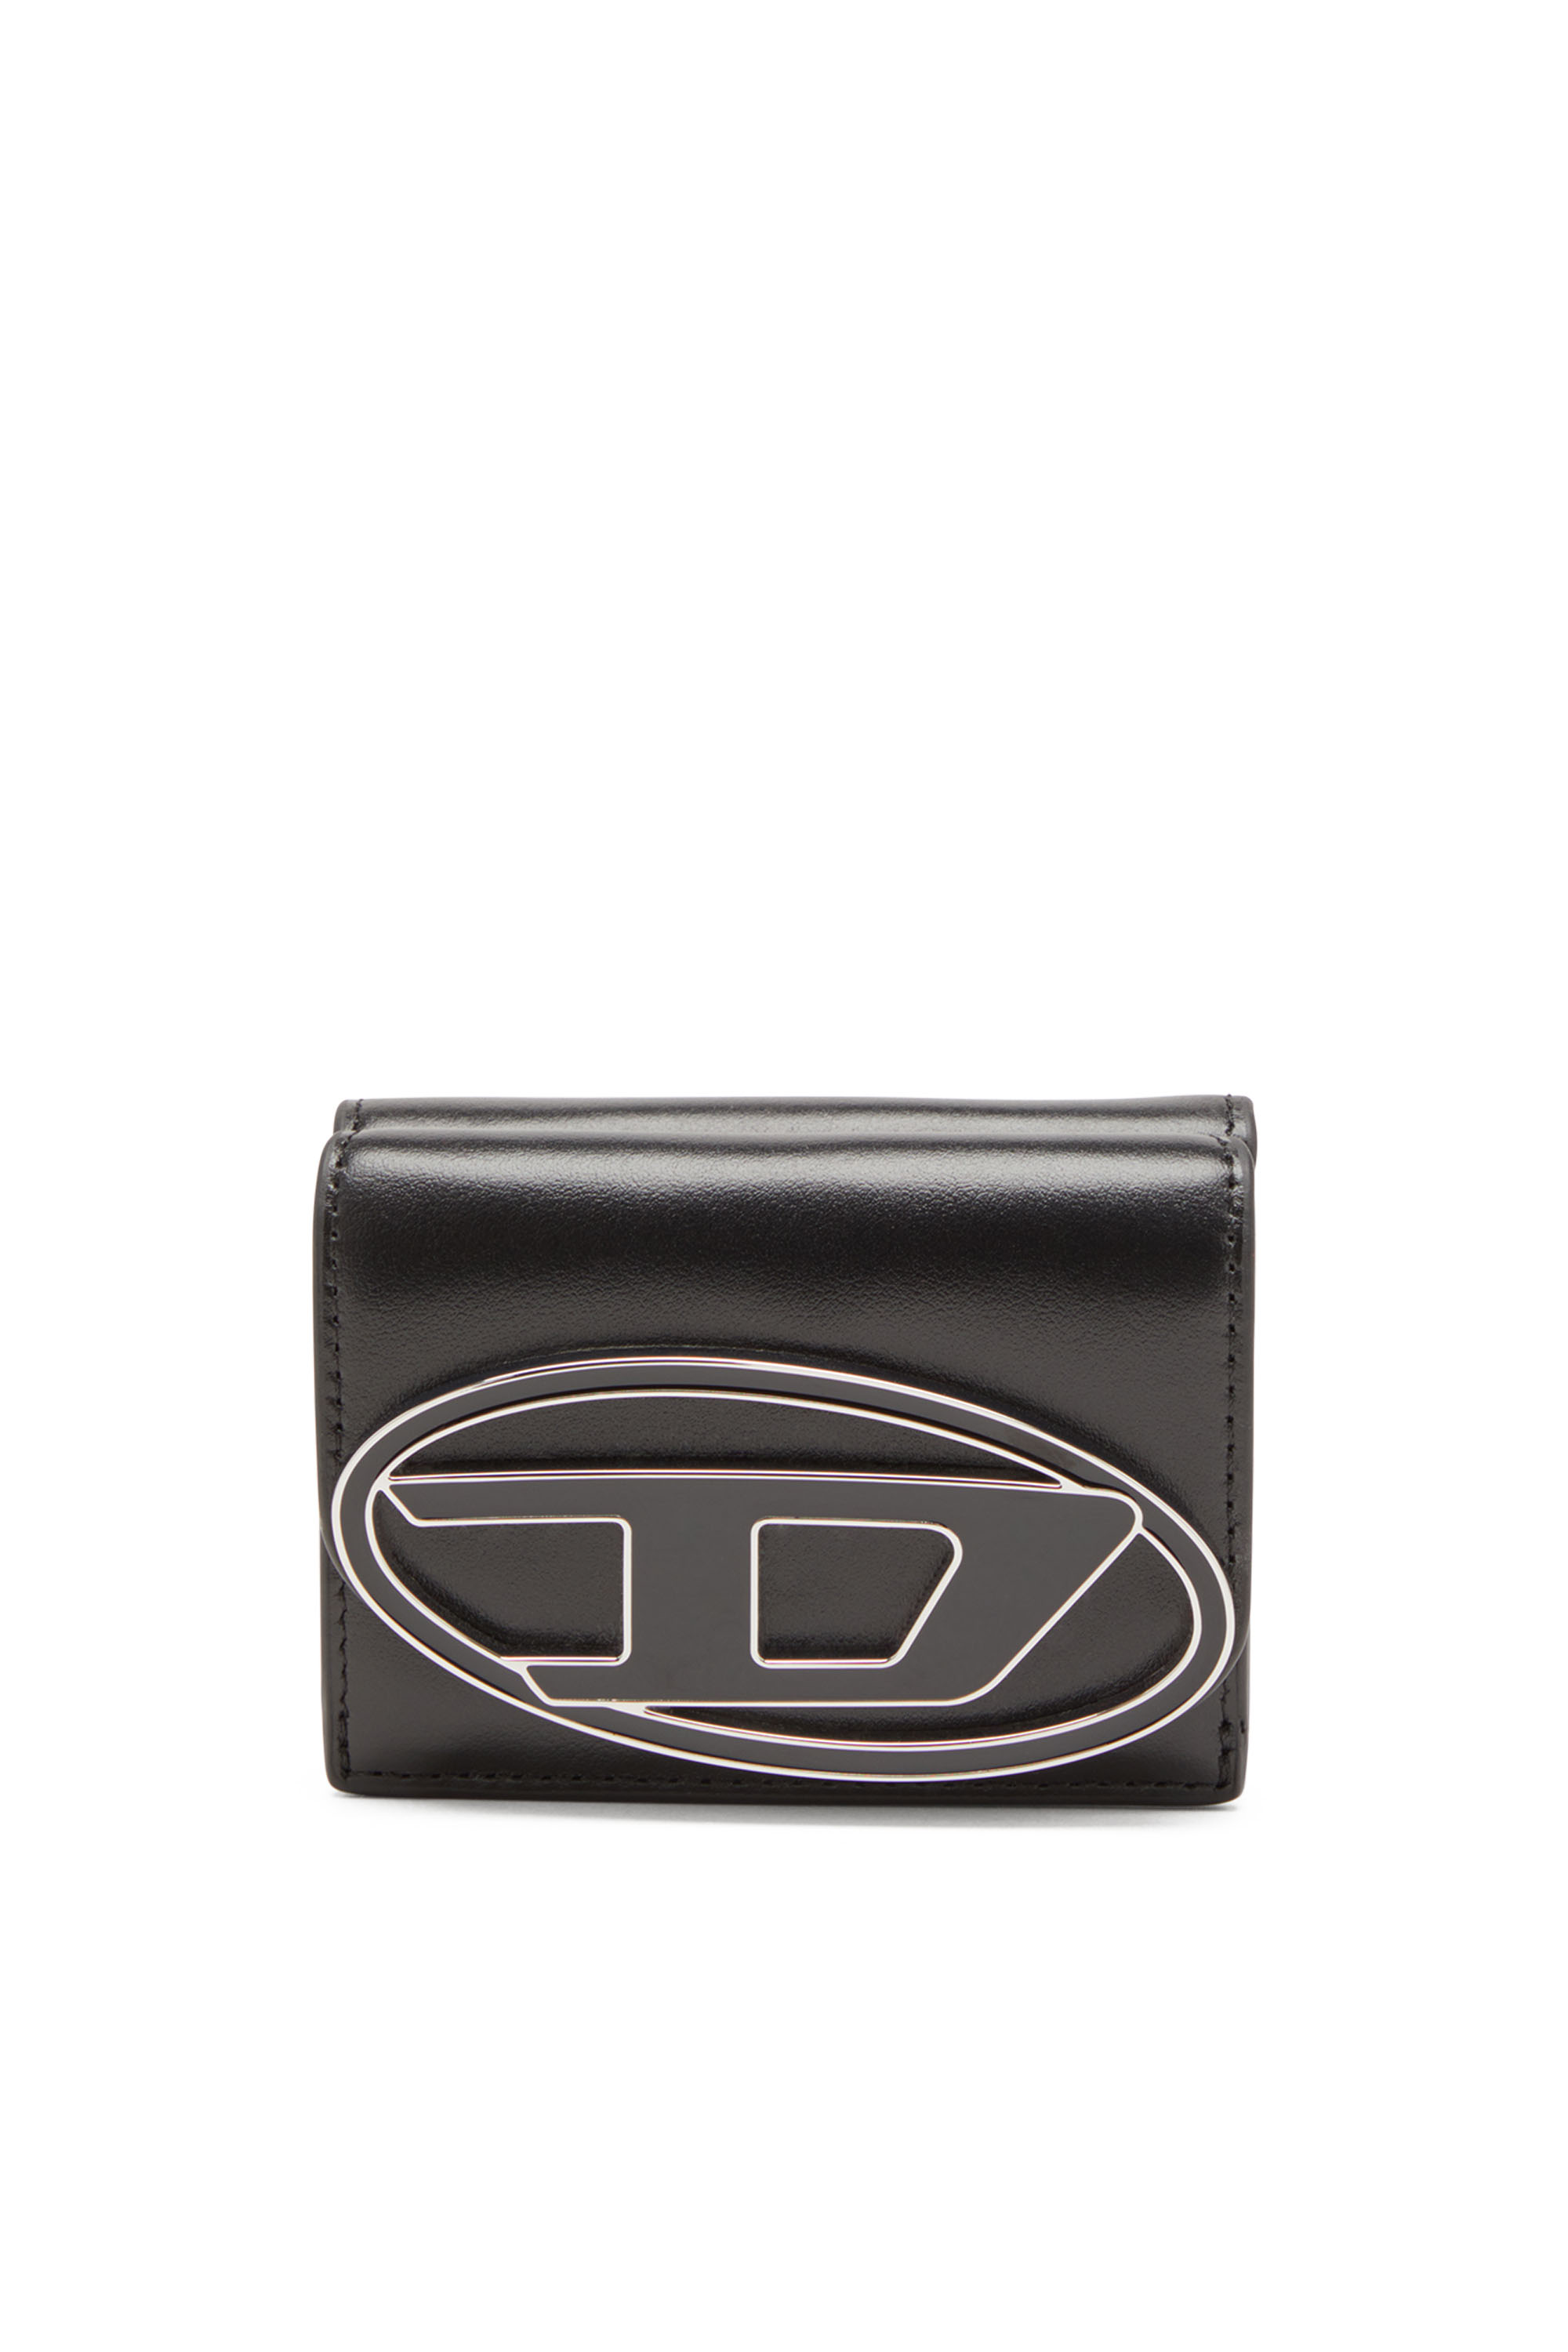 1DR TRI FOLD COIN XS II Tri-fold wallet in leather｜ブラック 